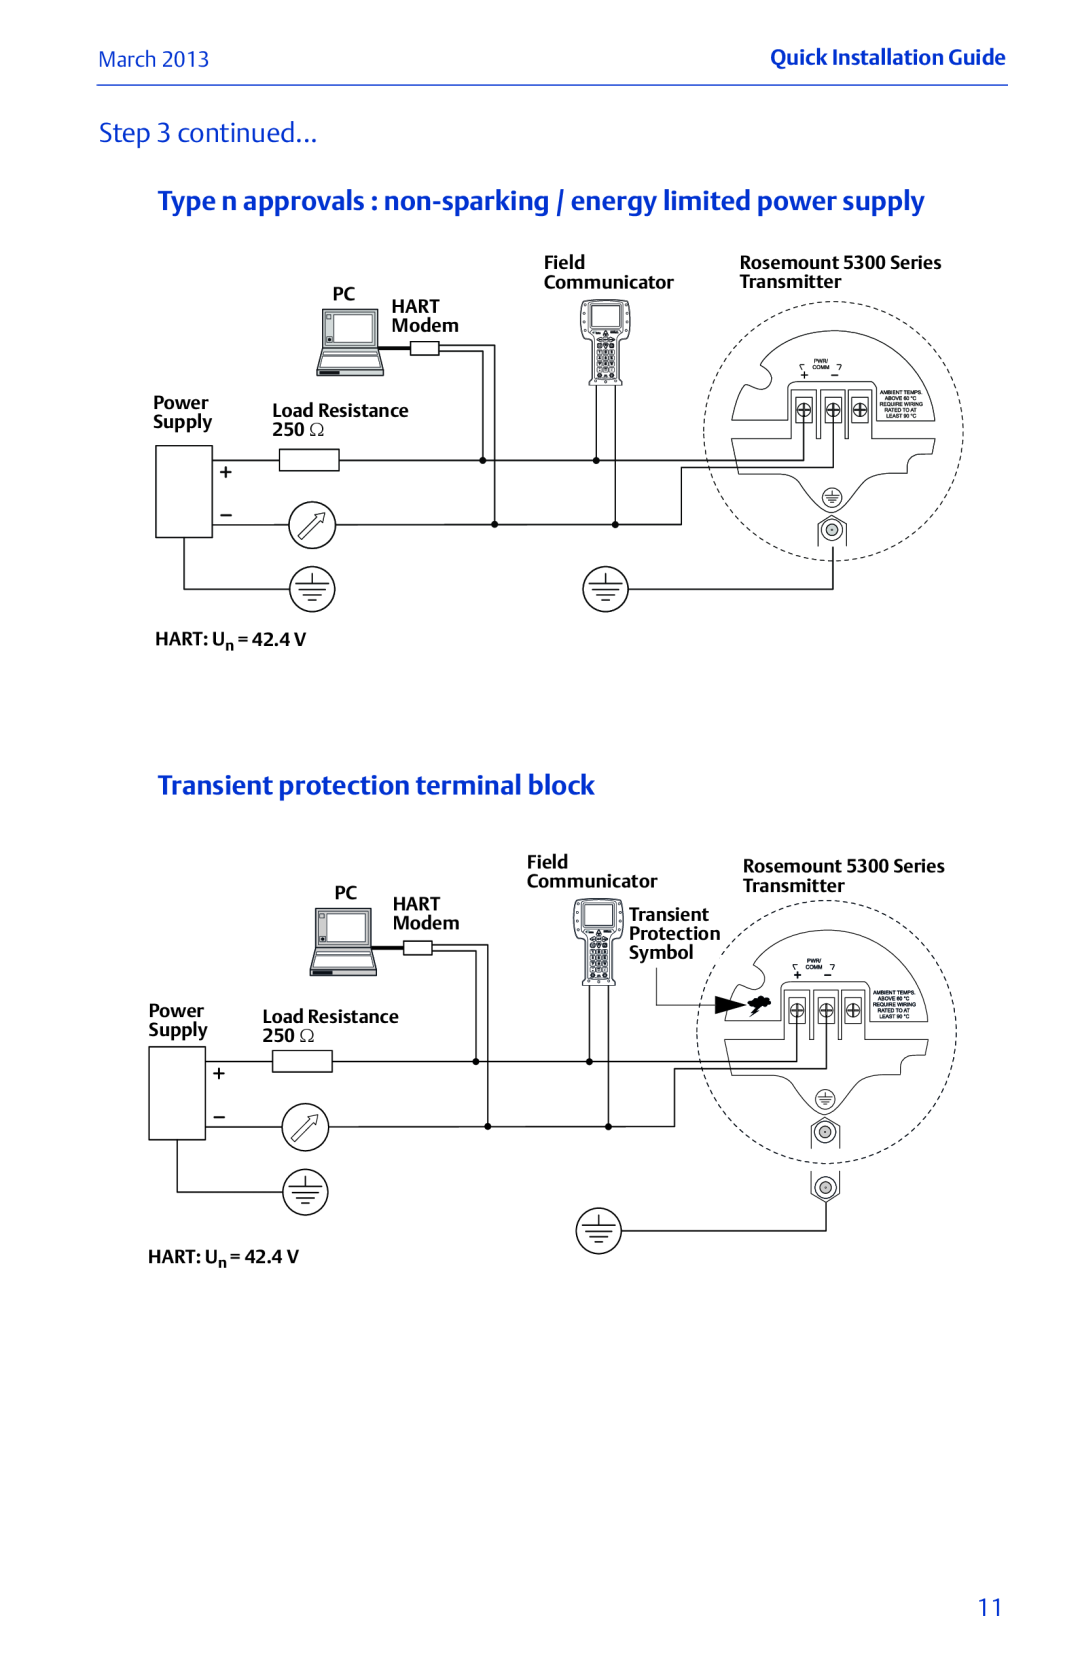 Emerson 00825-0100-4530 Rev EC Transient protection terminal block, continued, March, Quick Installation Guide, Field 